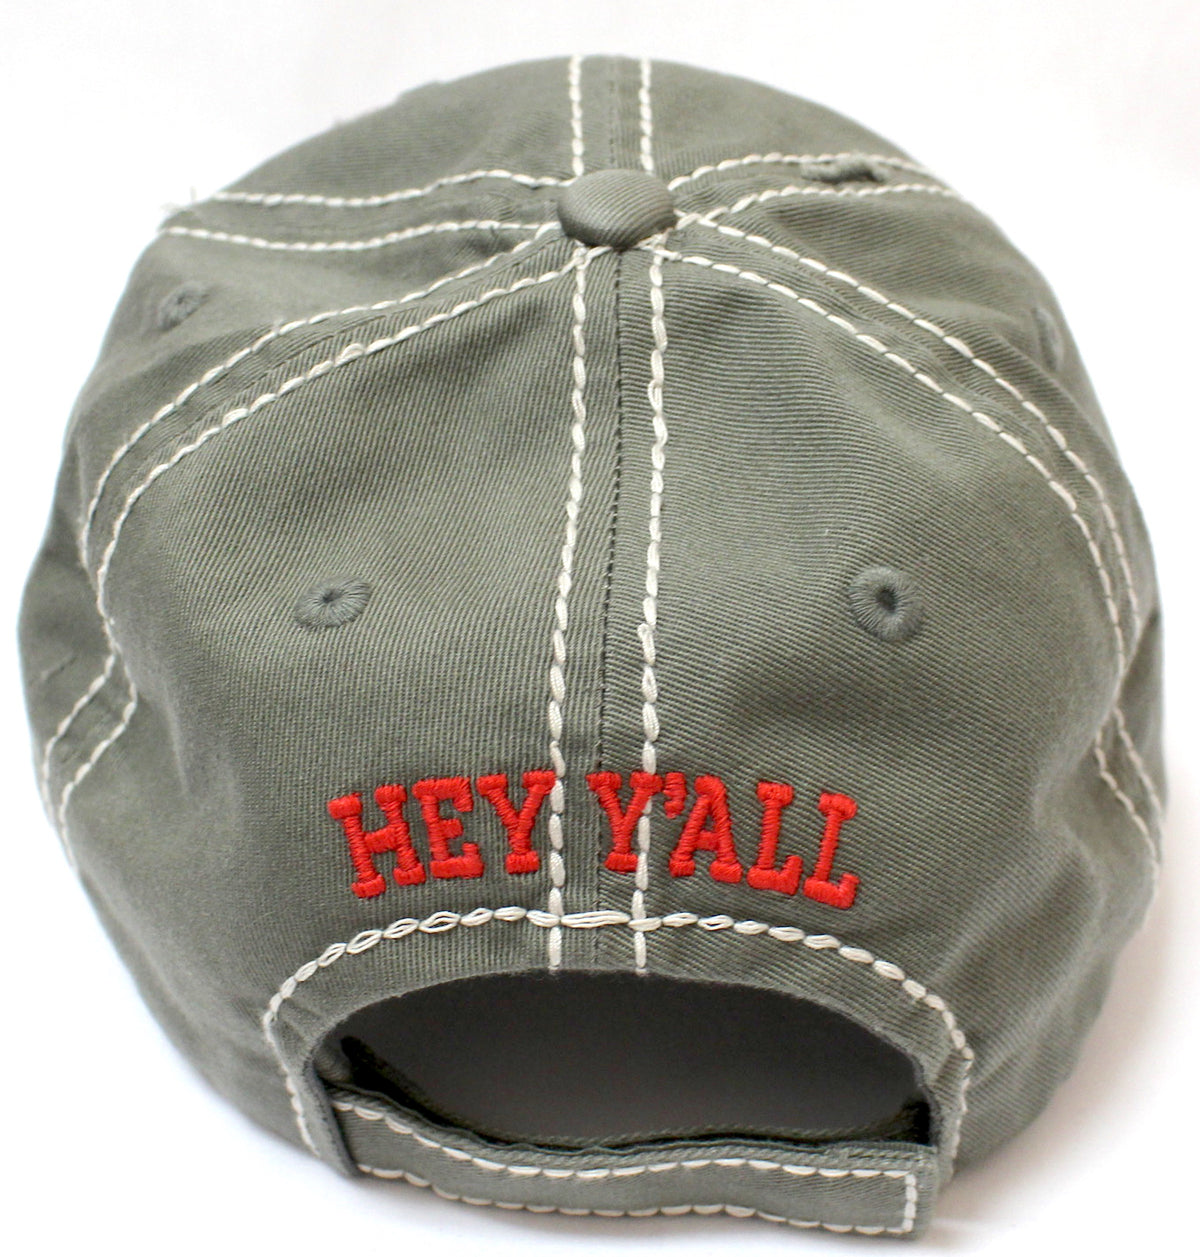 New!! MOSS "Hey Y'all!" Patch Embroidery Cap w/ Contrast Stitching & Distressed Details - Caps 'N Vintage 